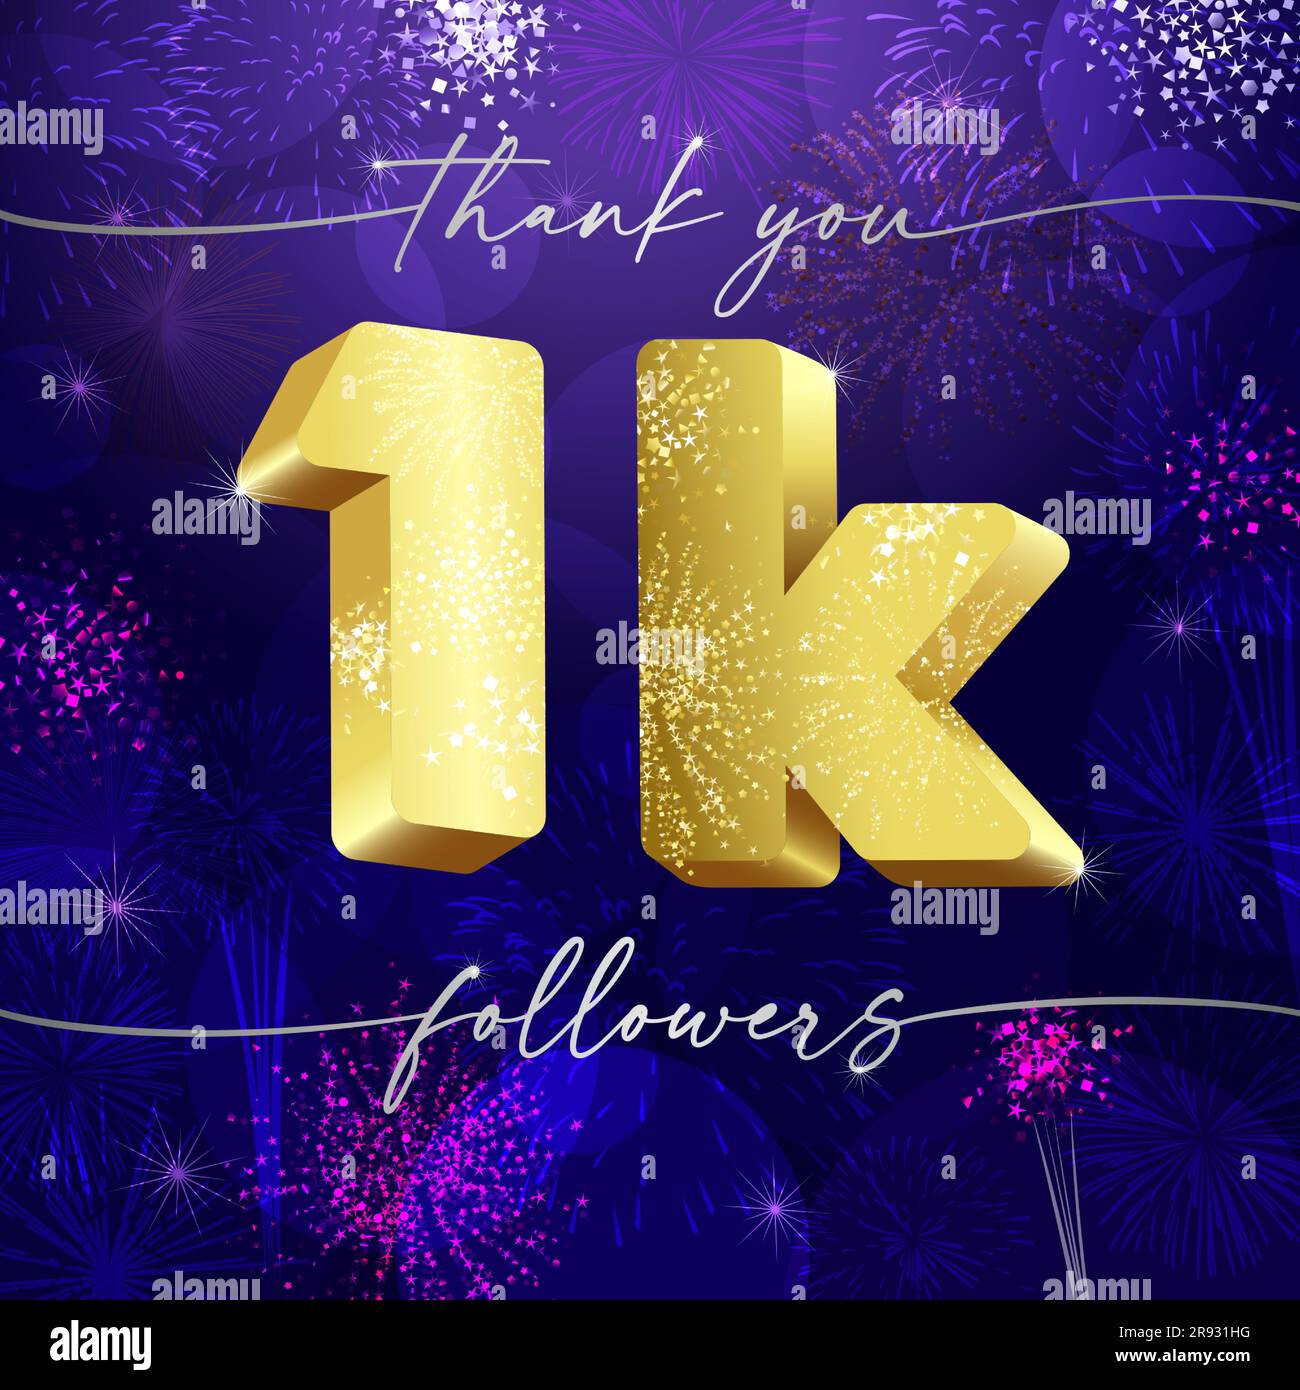 Thank you 1k followers creative poster. Shiny thanks for 1000 network subscribers.  1 000 likes celebration. Golden number 1 and letter K. 3D style Stock Vector